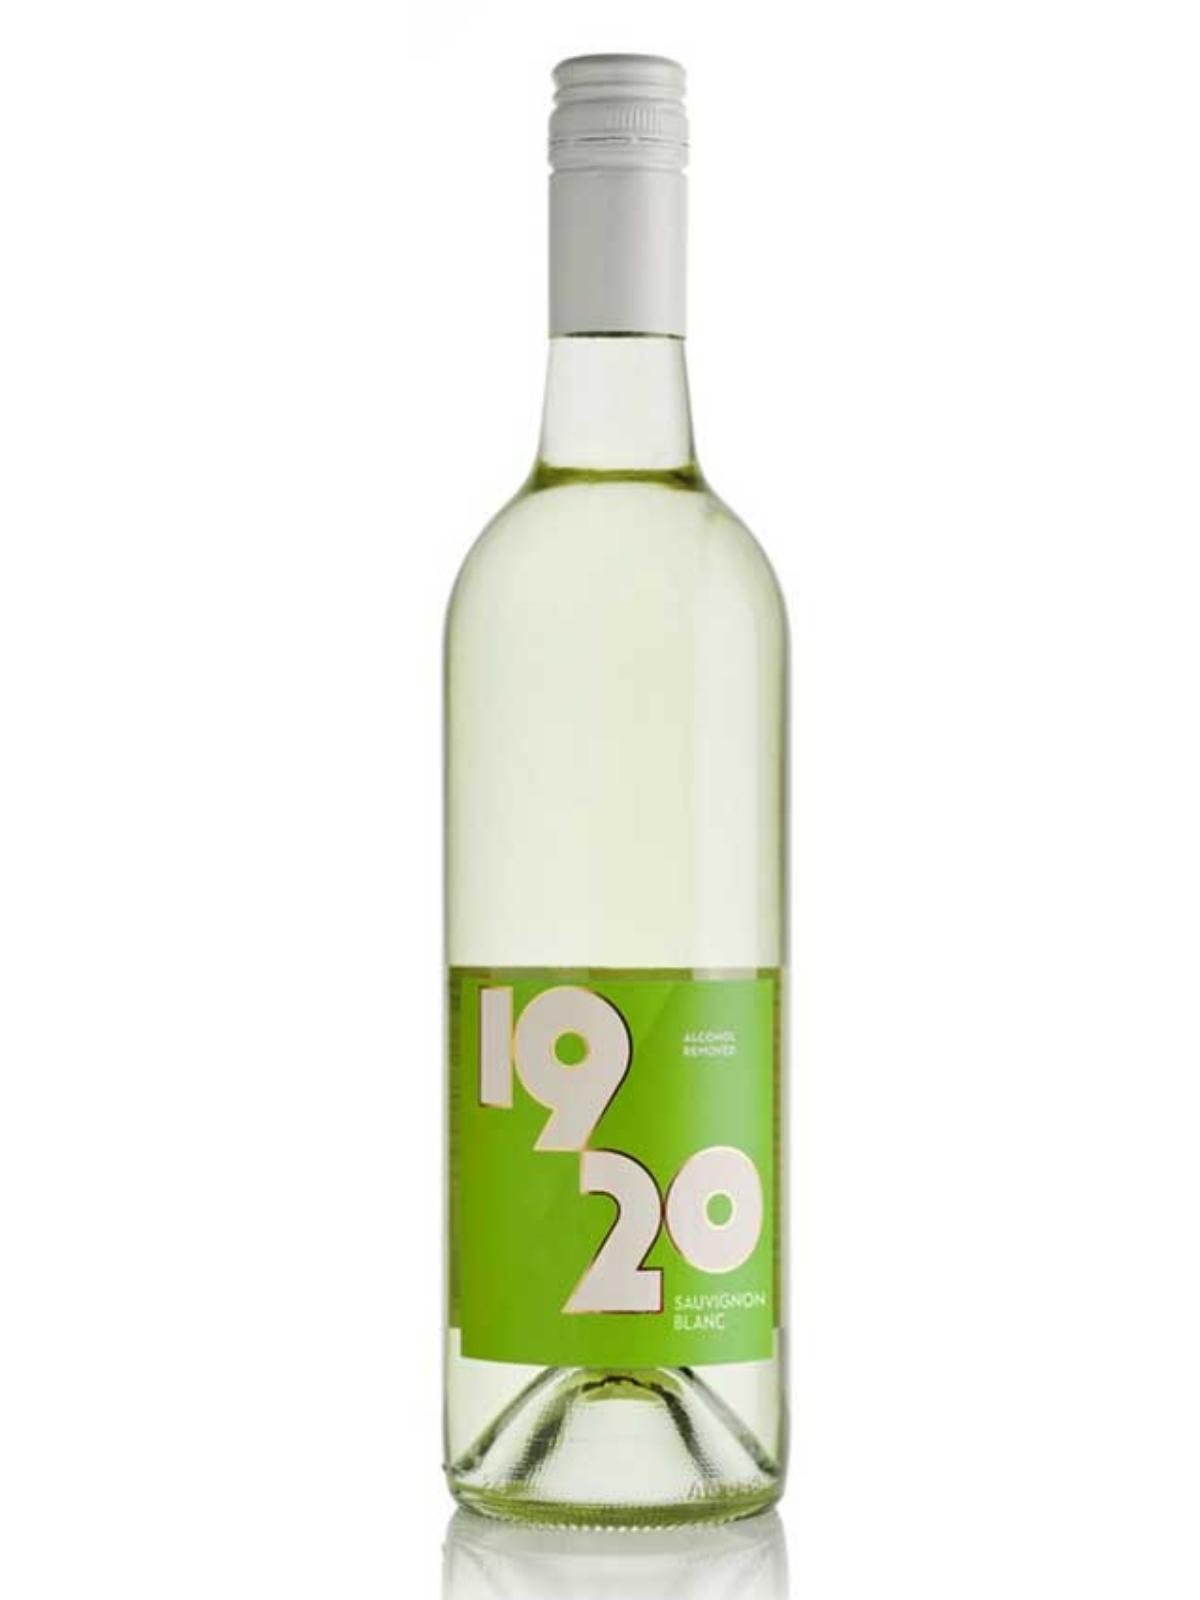 bottle of white wine with a green label and 1920 written in white with a white lid and background.